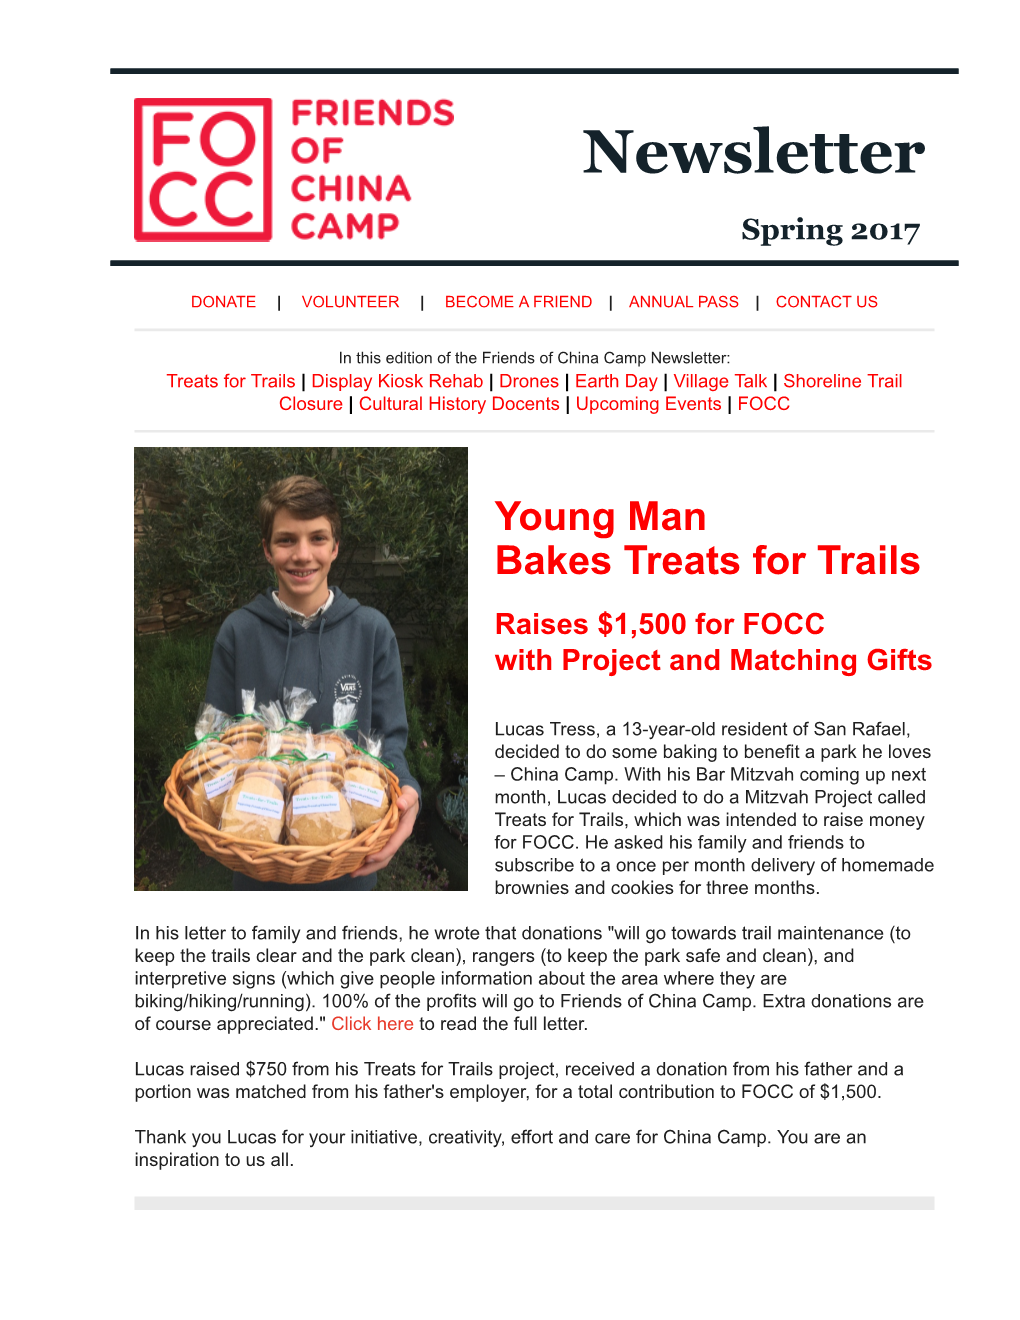 Friends of China Camp Spring Newsletter